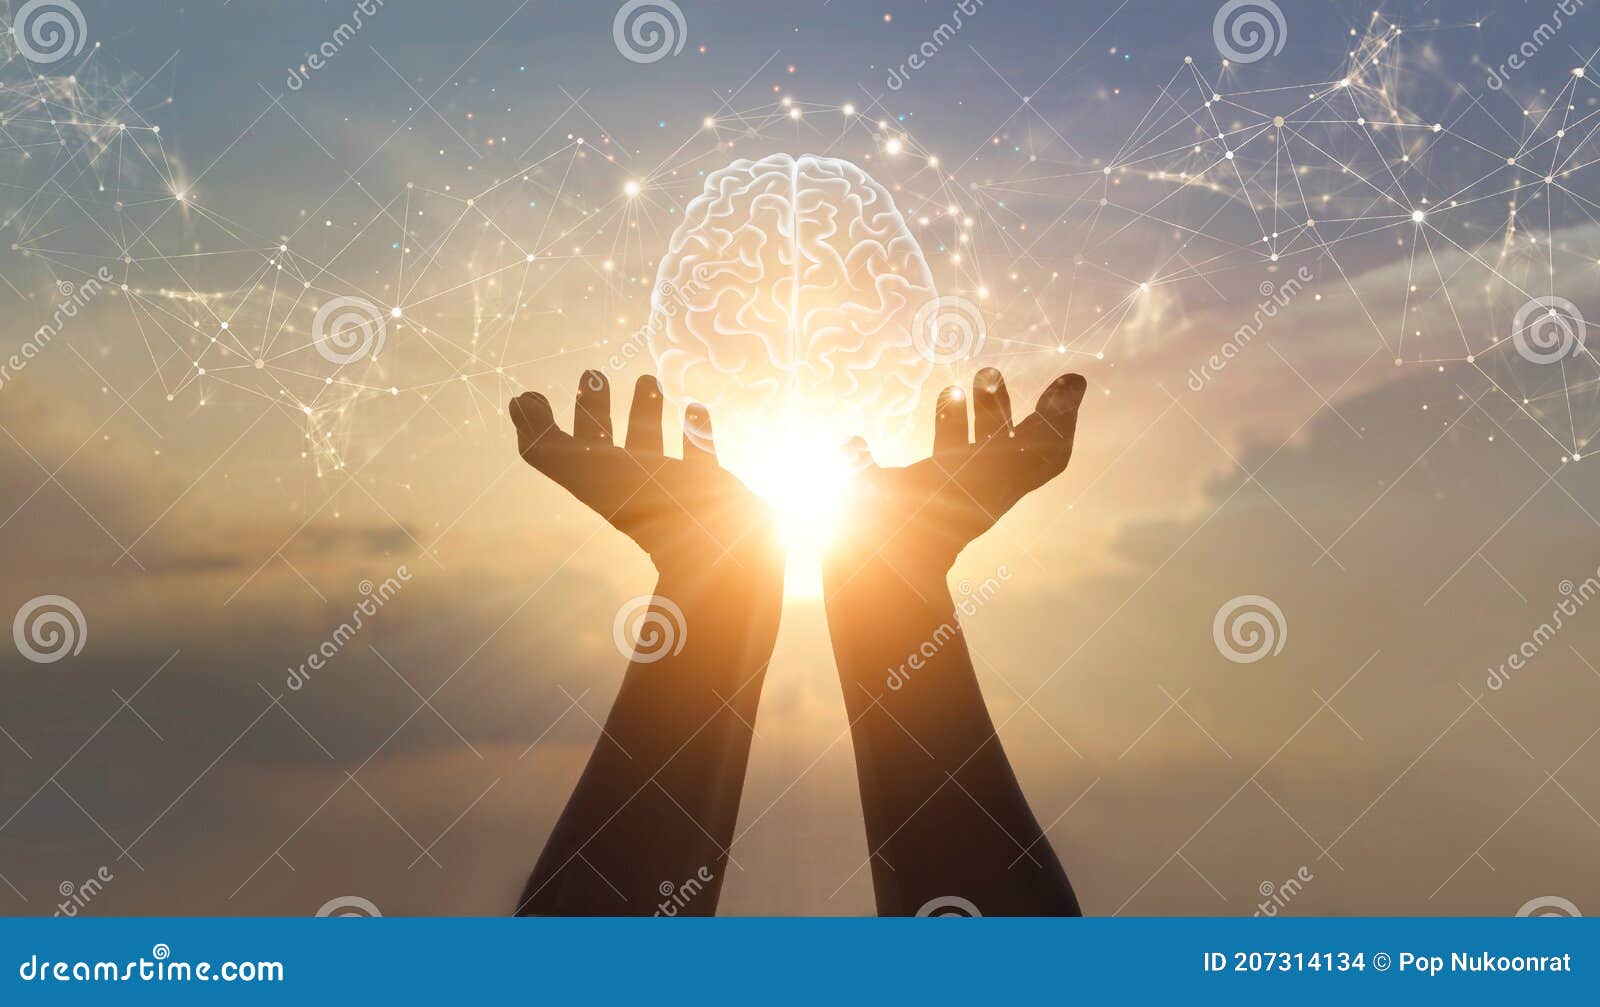 abstract palm hands holding brain with network connections, innovative technology in science and communication concept